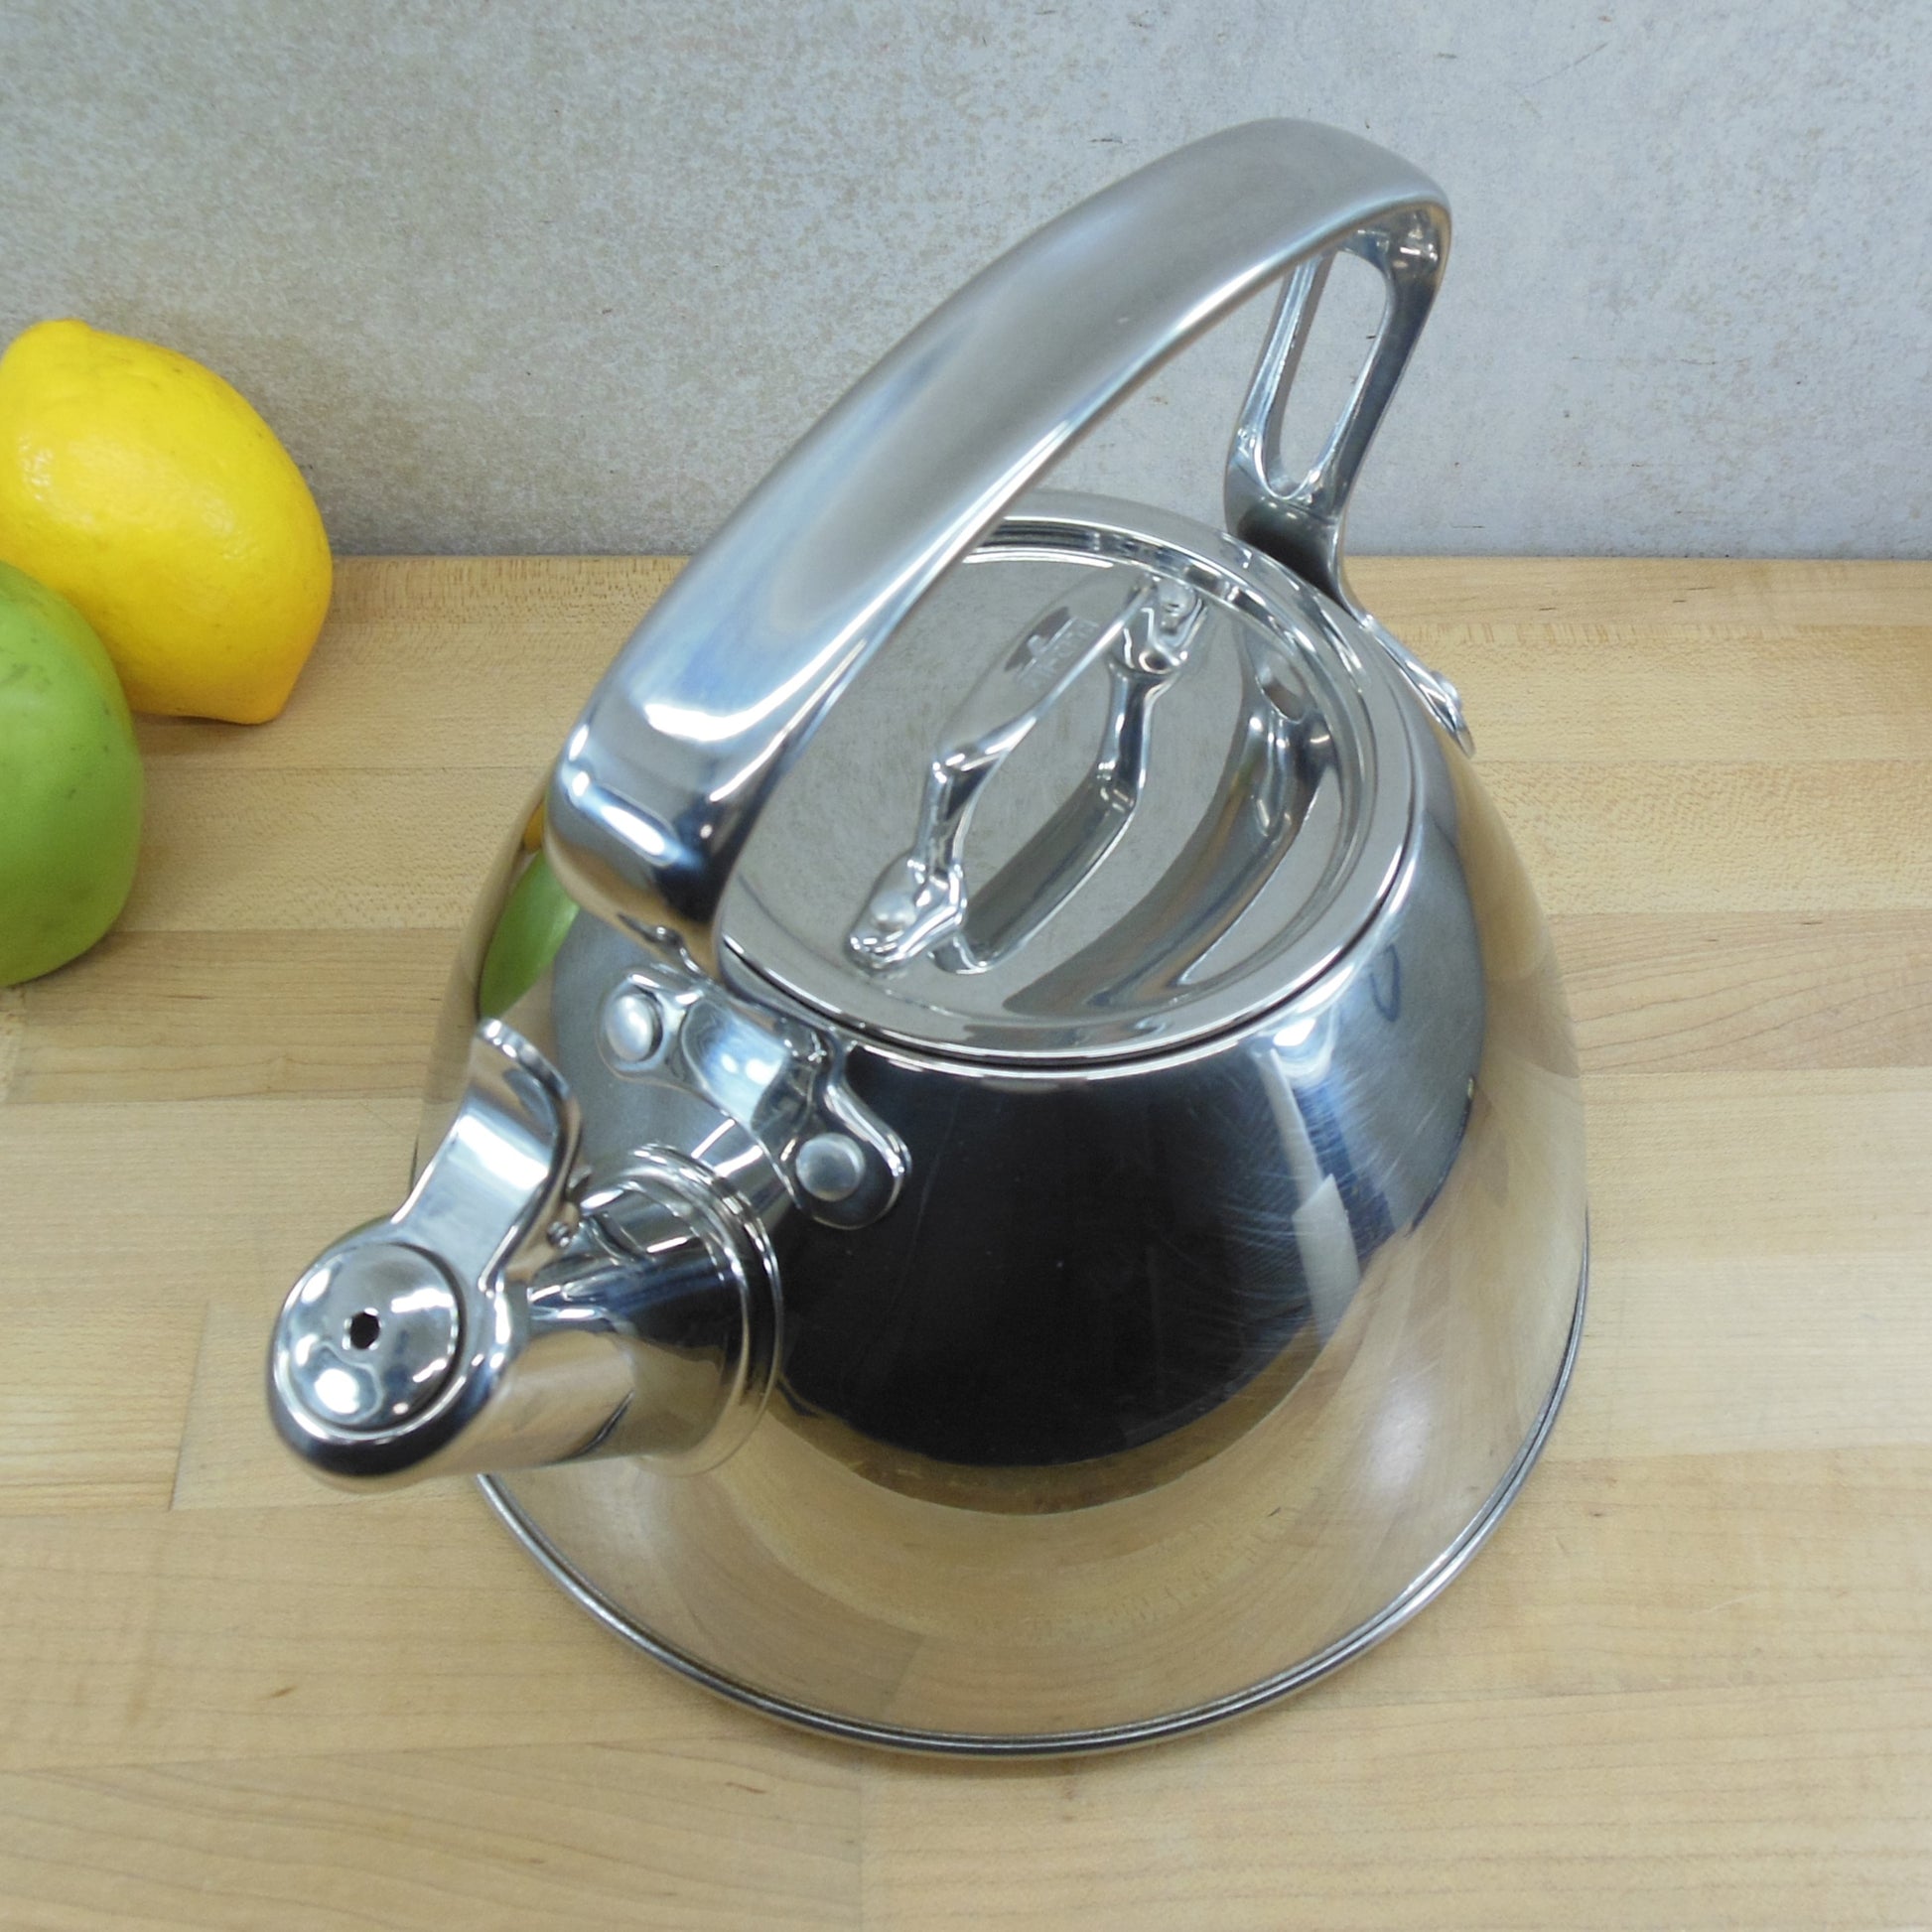 All-Clad Stainless 2 Quart Water Tea Kettle E8619964 Used